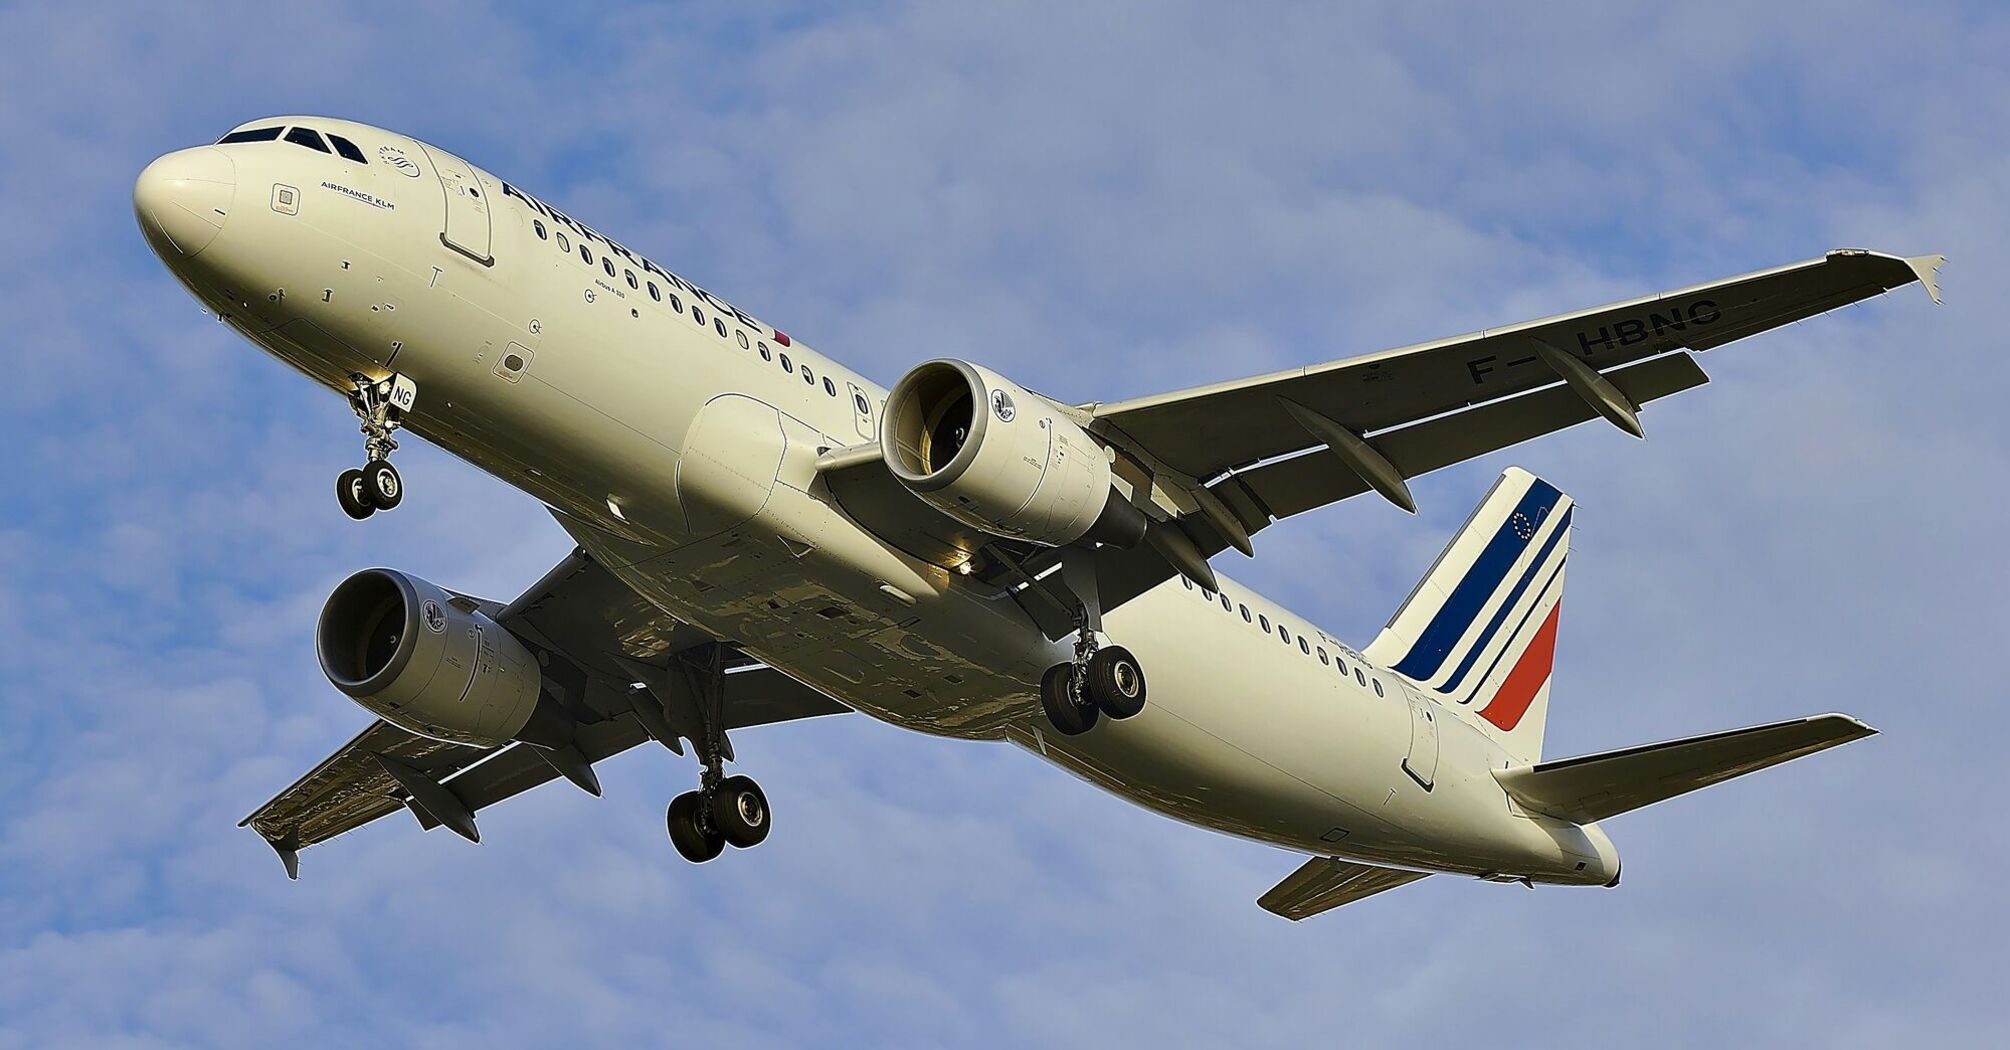 Air France plane flying in the sky